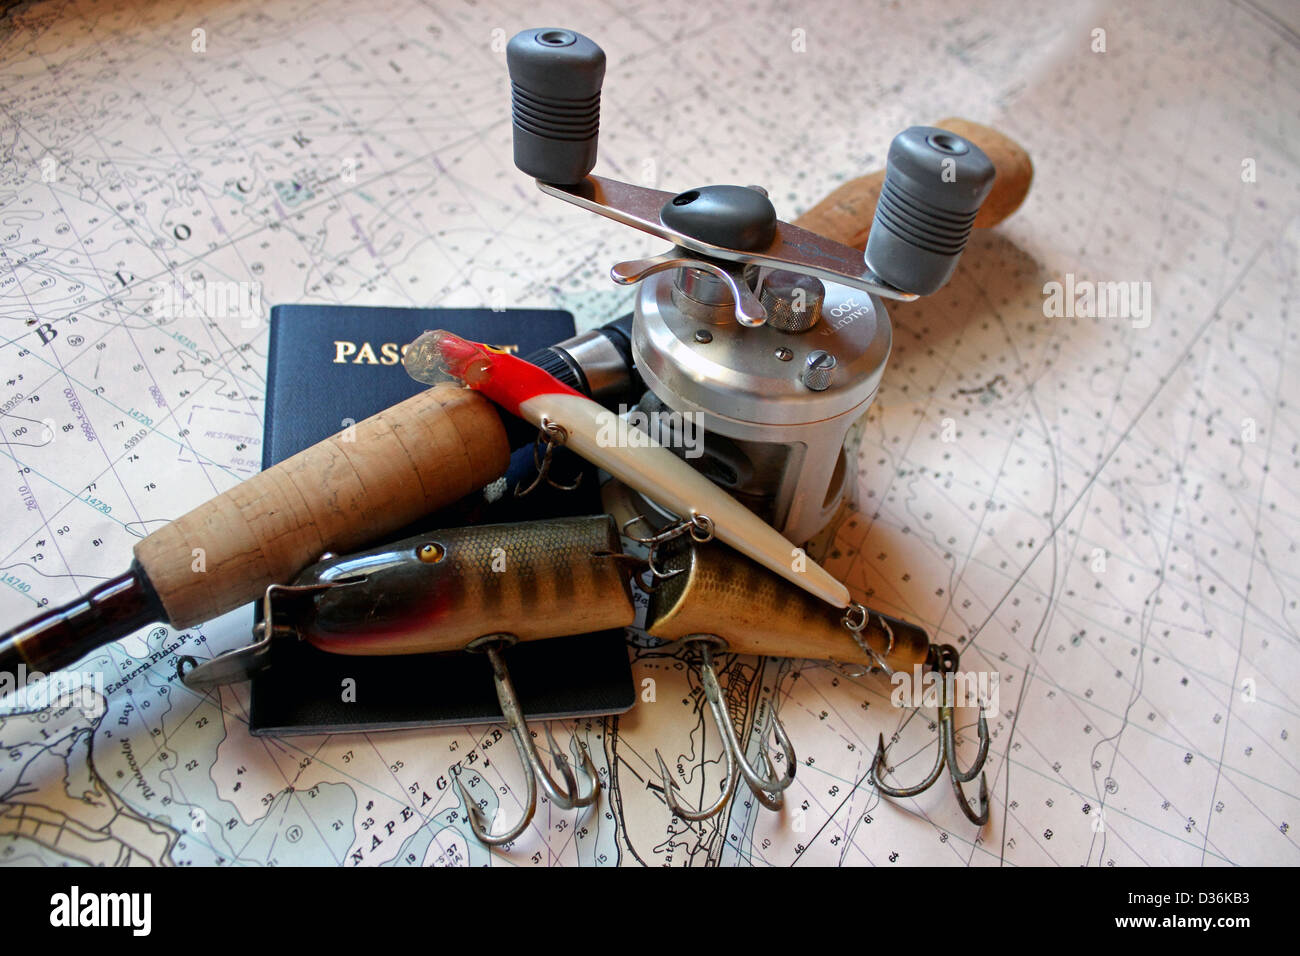 A fishing rod and lures with a passport rest on a nautical chart. Stock Photo